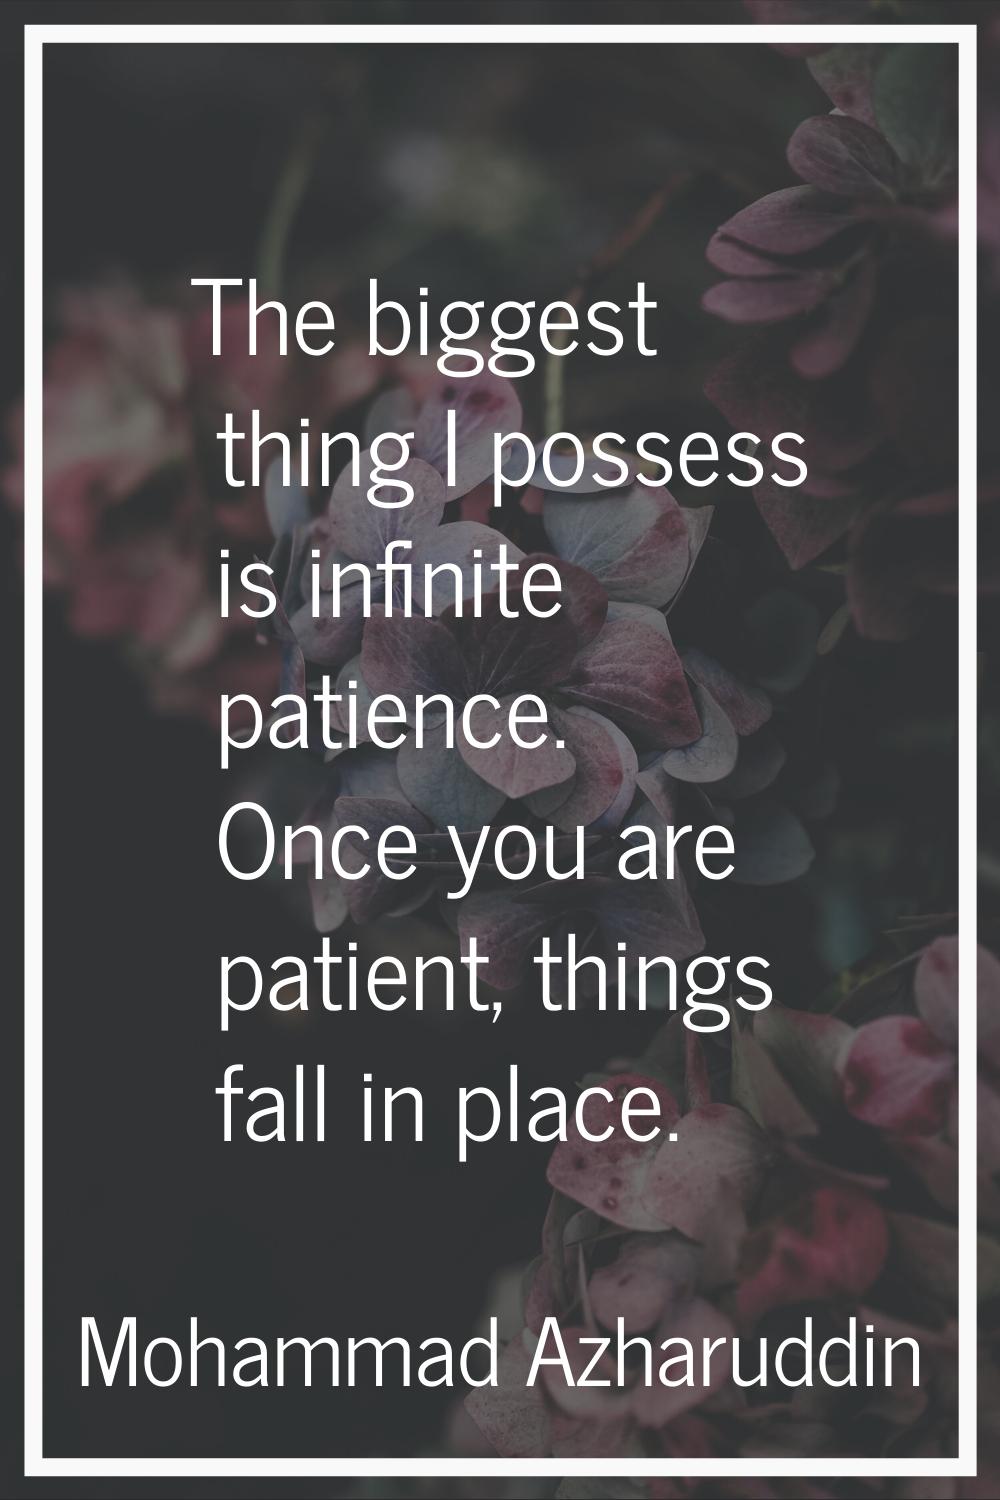 The biggest thing I possess is infinite patience. Once you are patient, things fall in place.